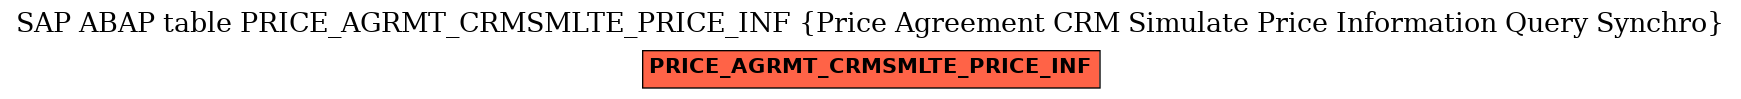 E-R Diagram for table PRICE_AGRMT_CRMSMLTE_PRICE_INF (Price Agreement CRM Simulate Price Information Query Synchro)